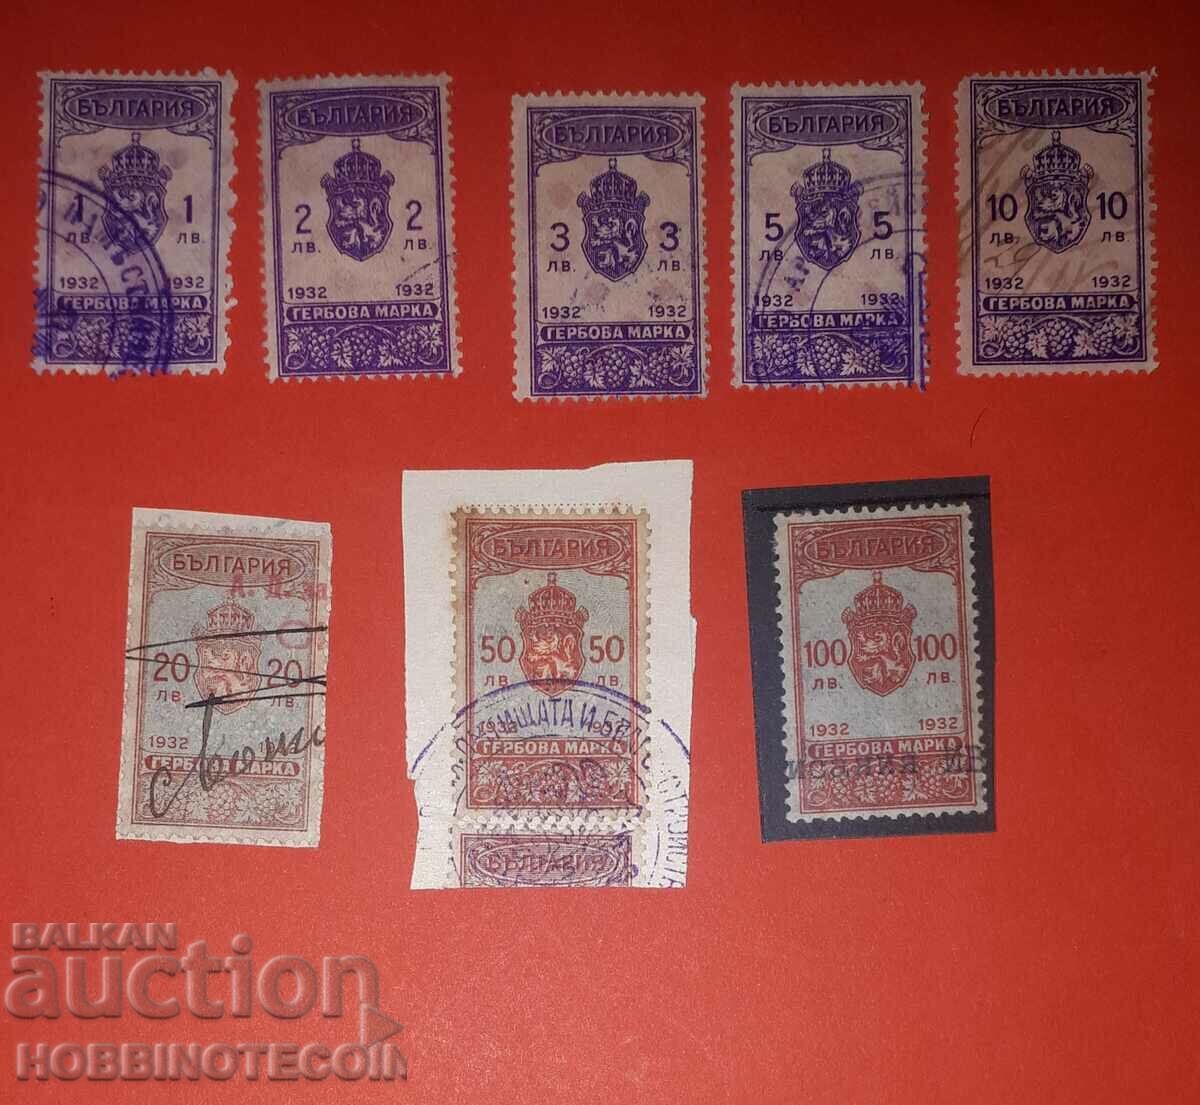 BULGARIA STAMPS STAMPS STAMPS 1 - 100 BGN 1932